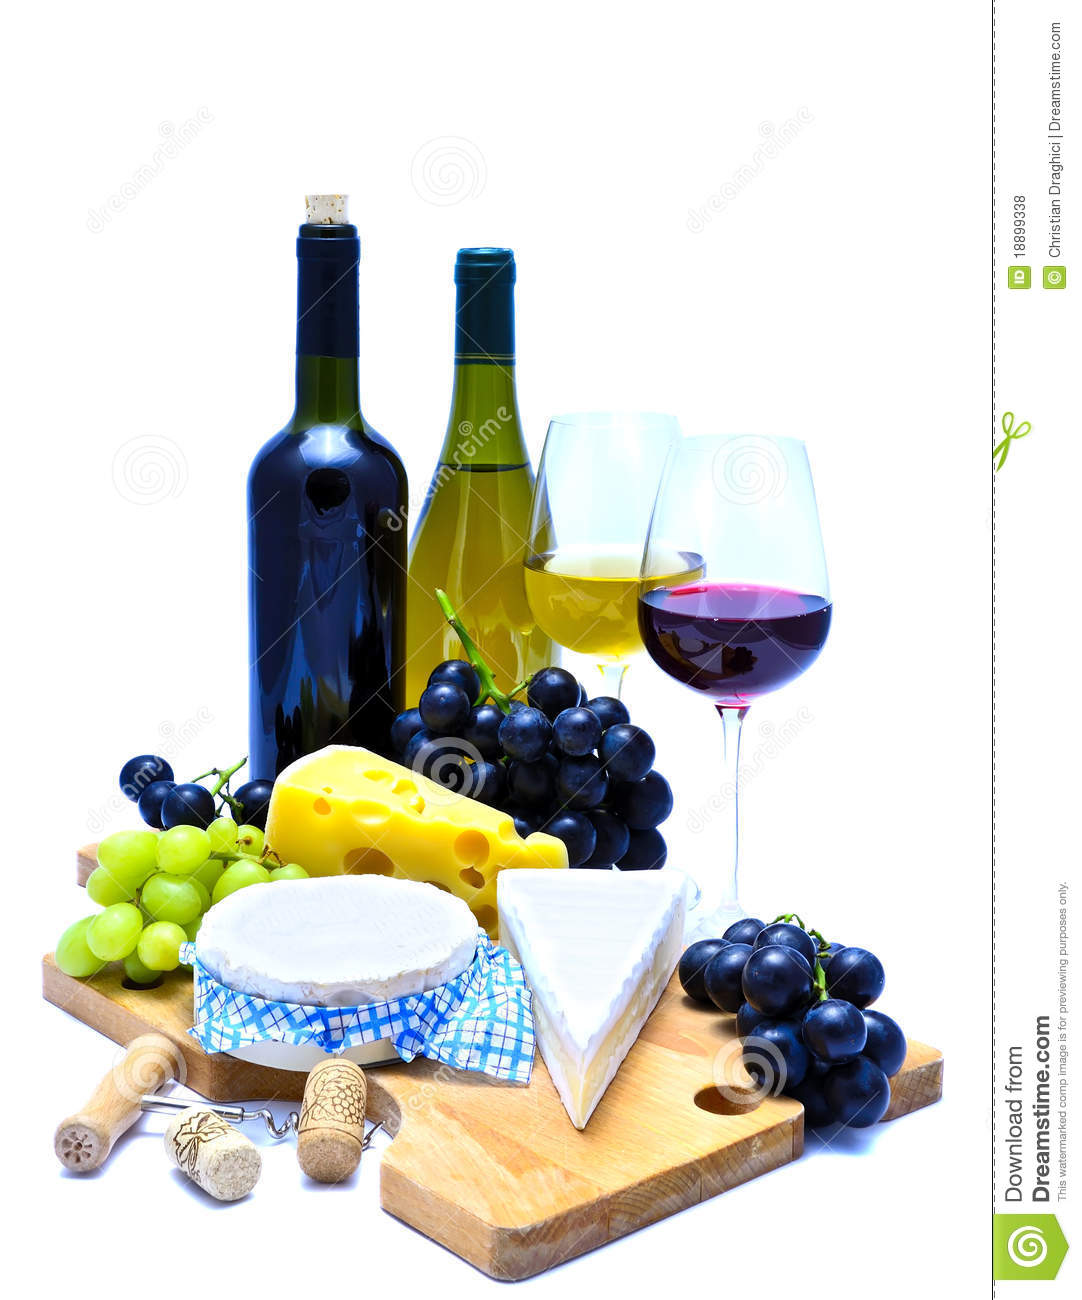 Cheese Board And Wine Royalty Free Stock Photos   Image  18899338